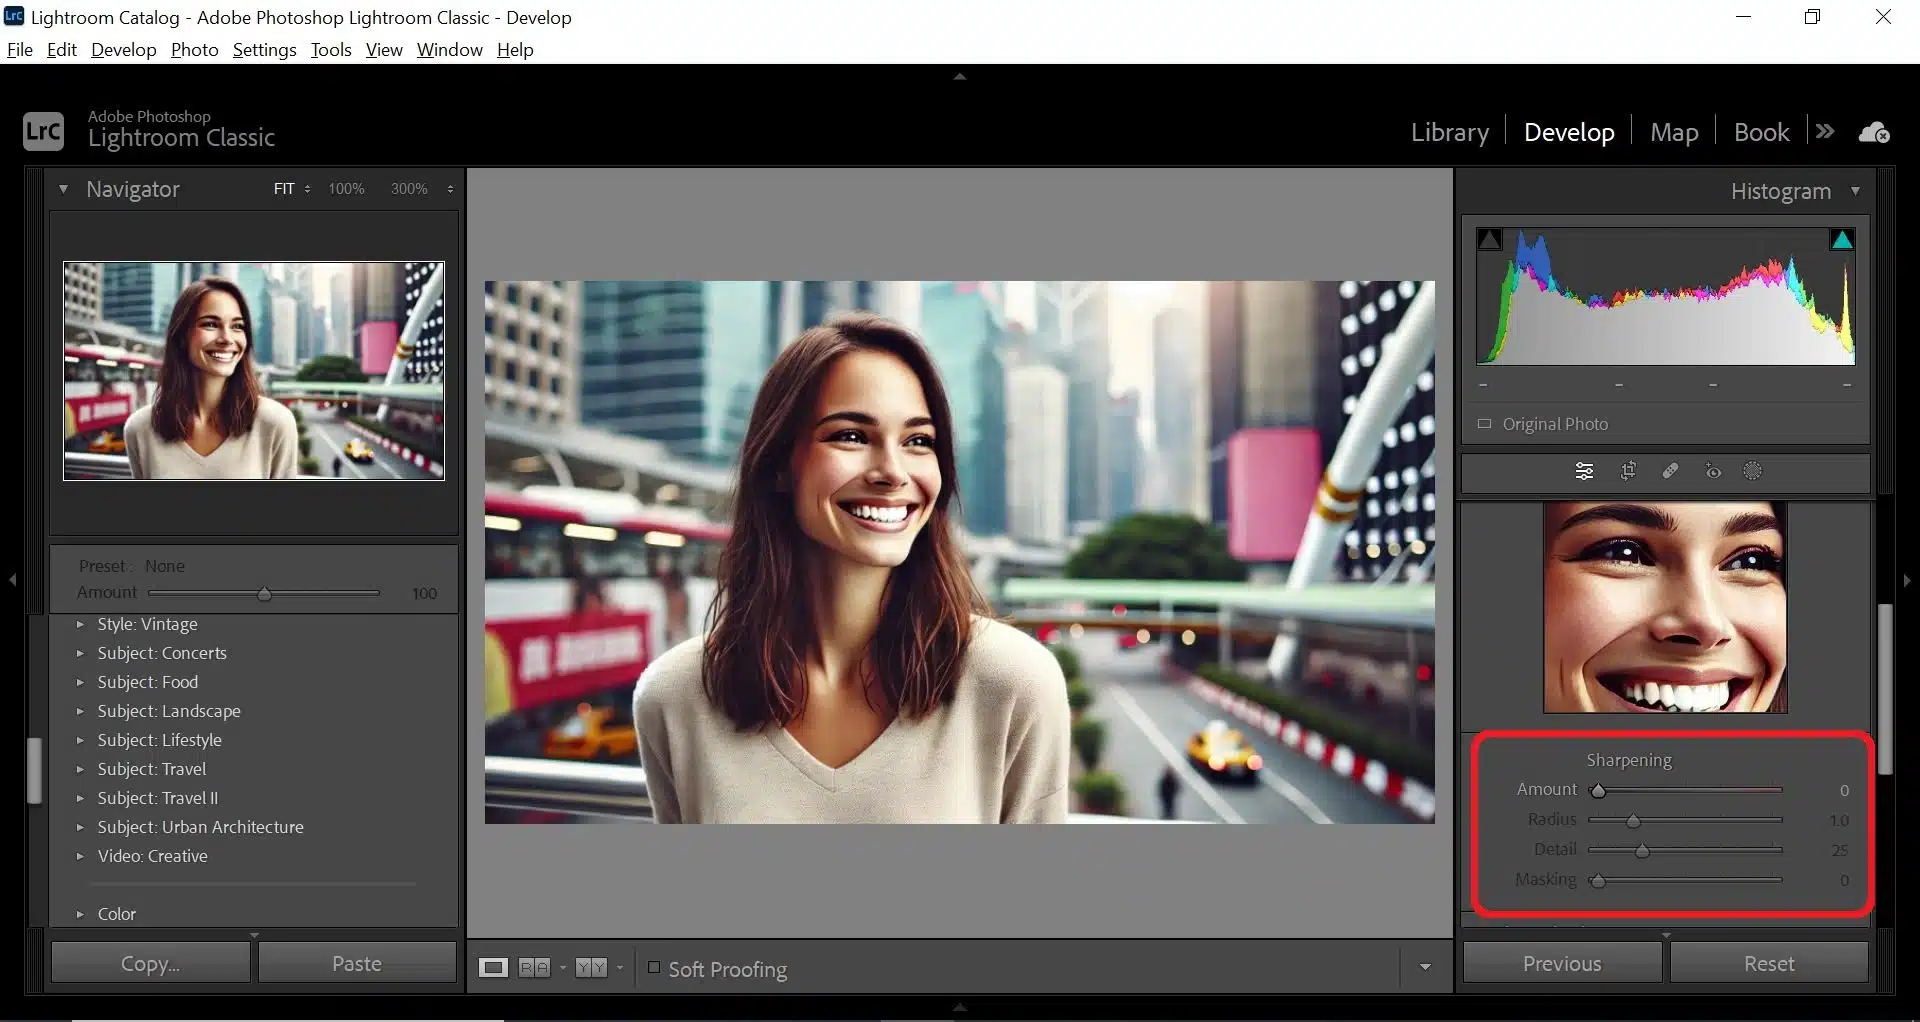 Adobe Lr interface showing a portrait of a smiling woman with editing tools visible. The interface includes sharpening options with sliders for amount, radius, detail, and masking.